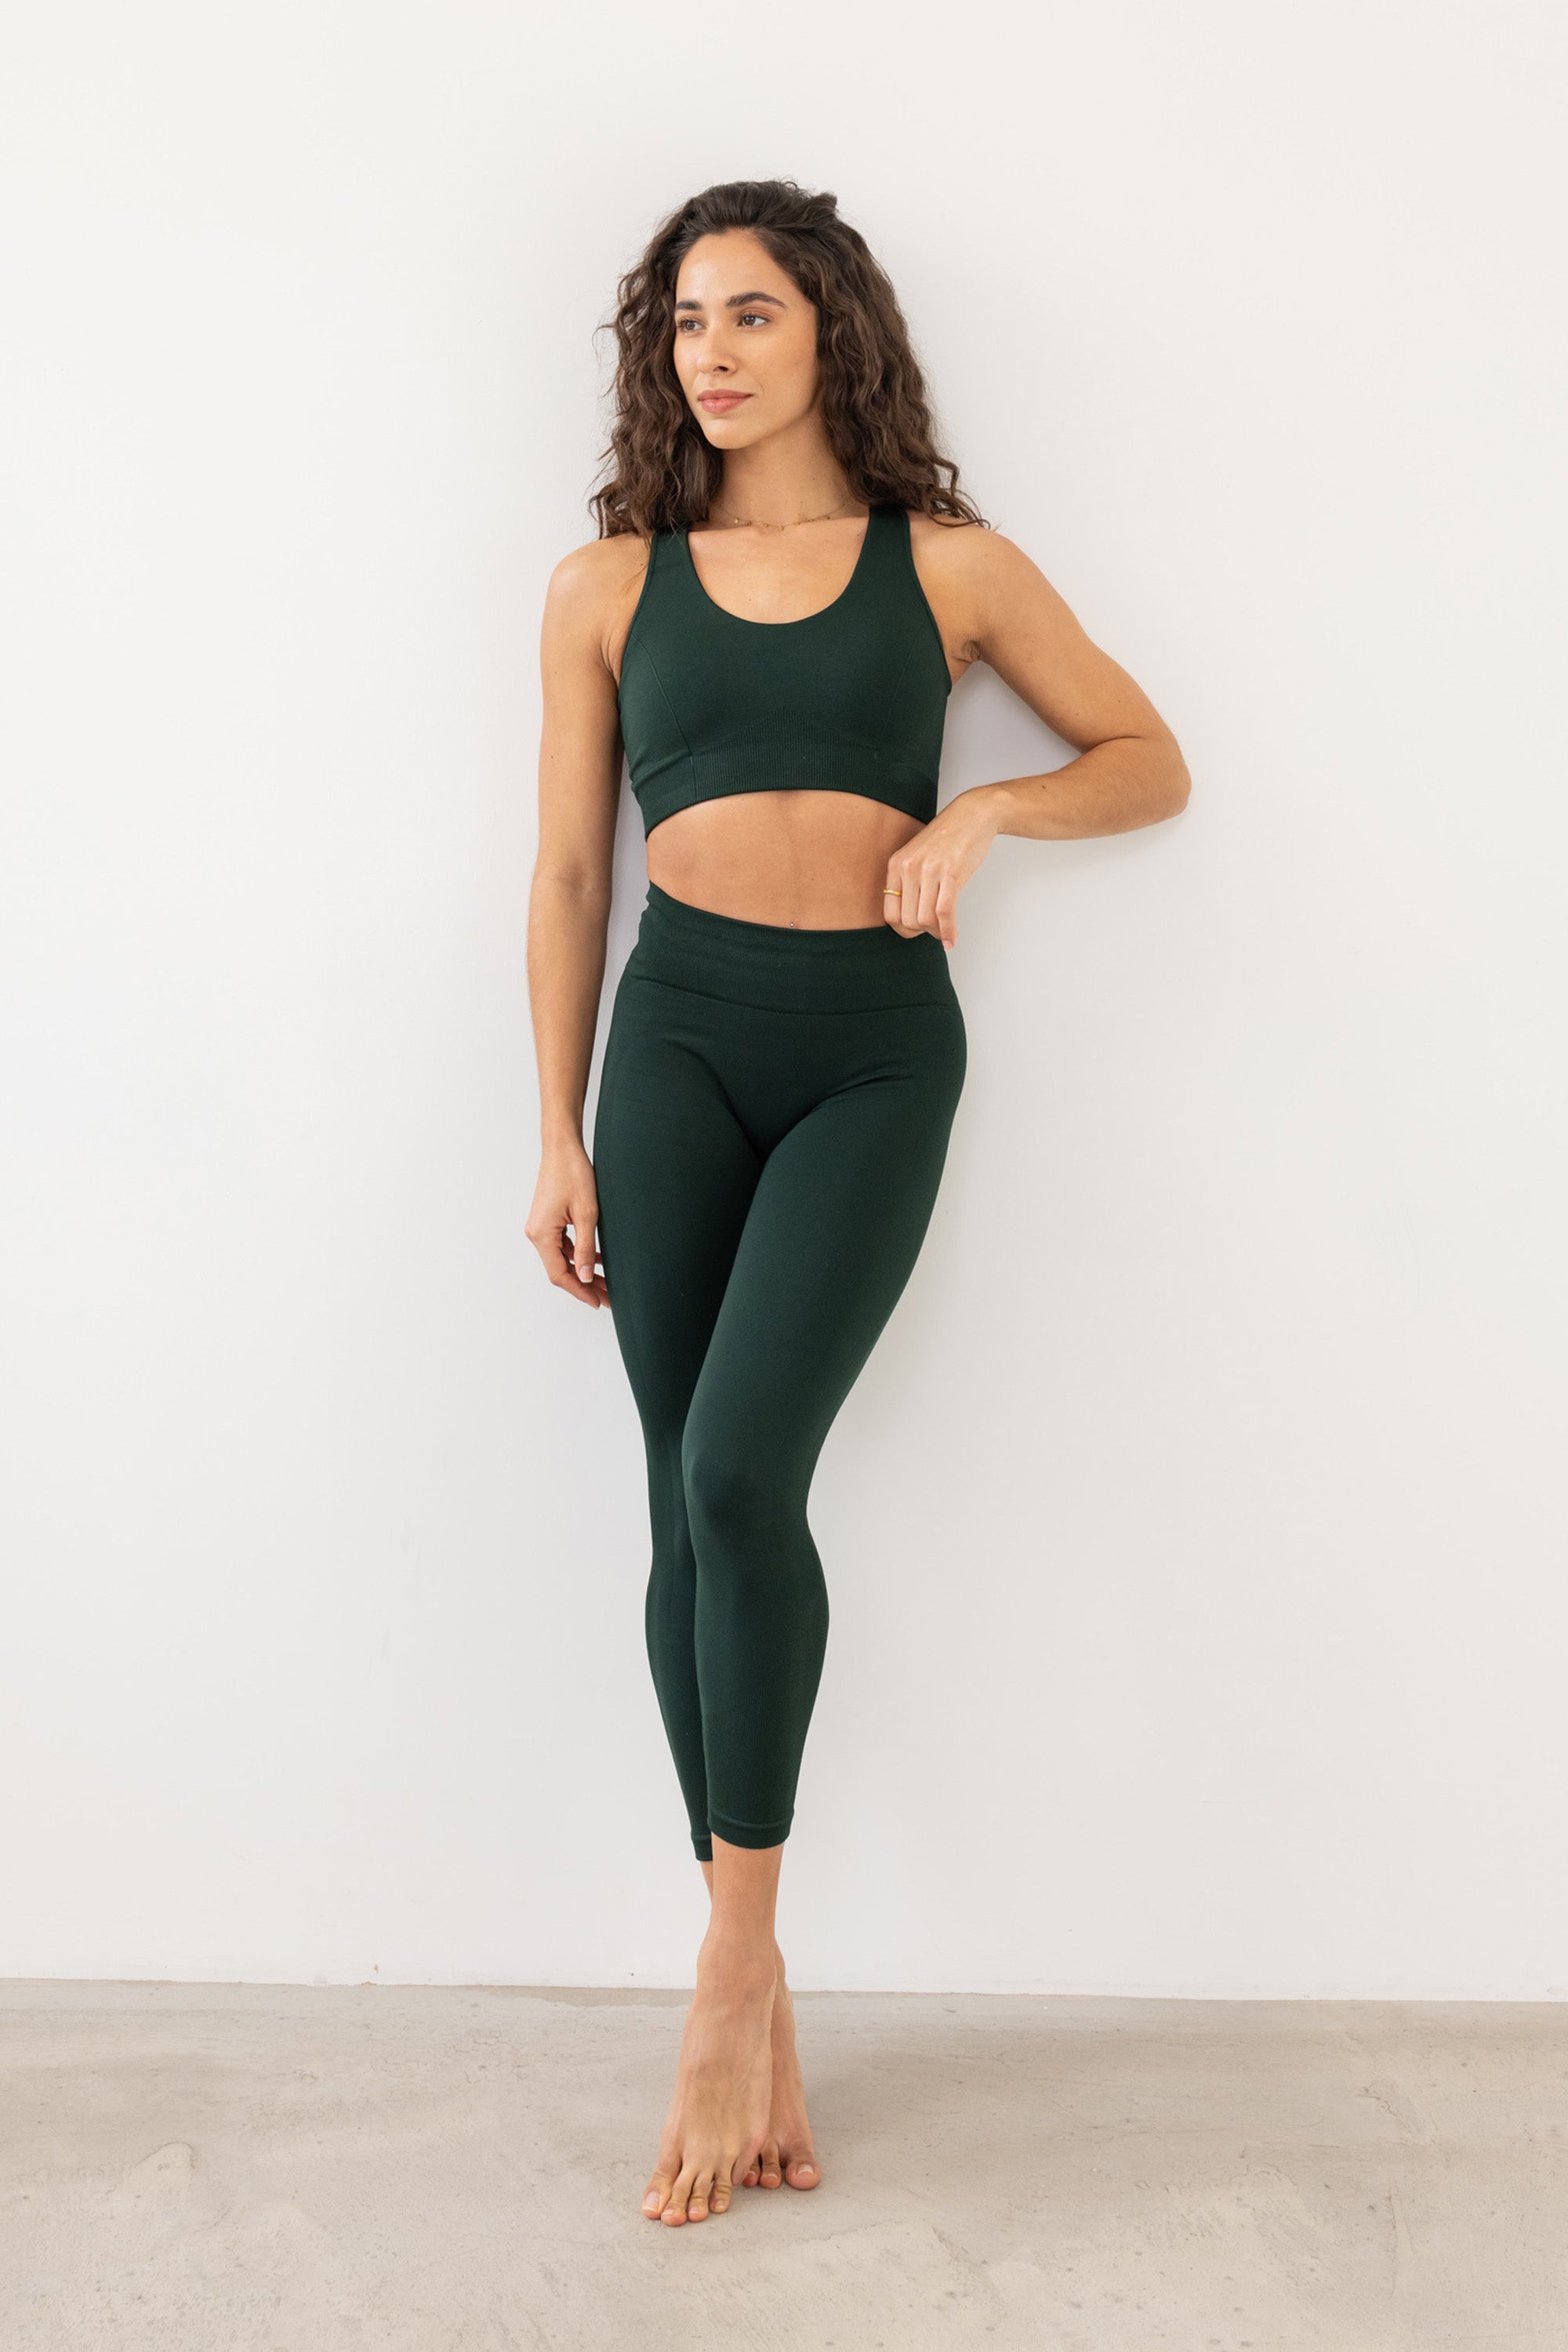 Dark green sculpting, supporting, contouring and shaping V neck sports bra with underband and black detail from recycled seamless fabric for yoga, pilates, gym, barre, running, gym and exercise from sustainable activewear brand Jilla Active 